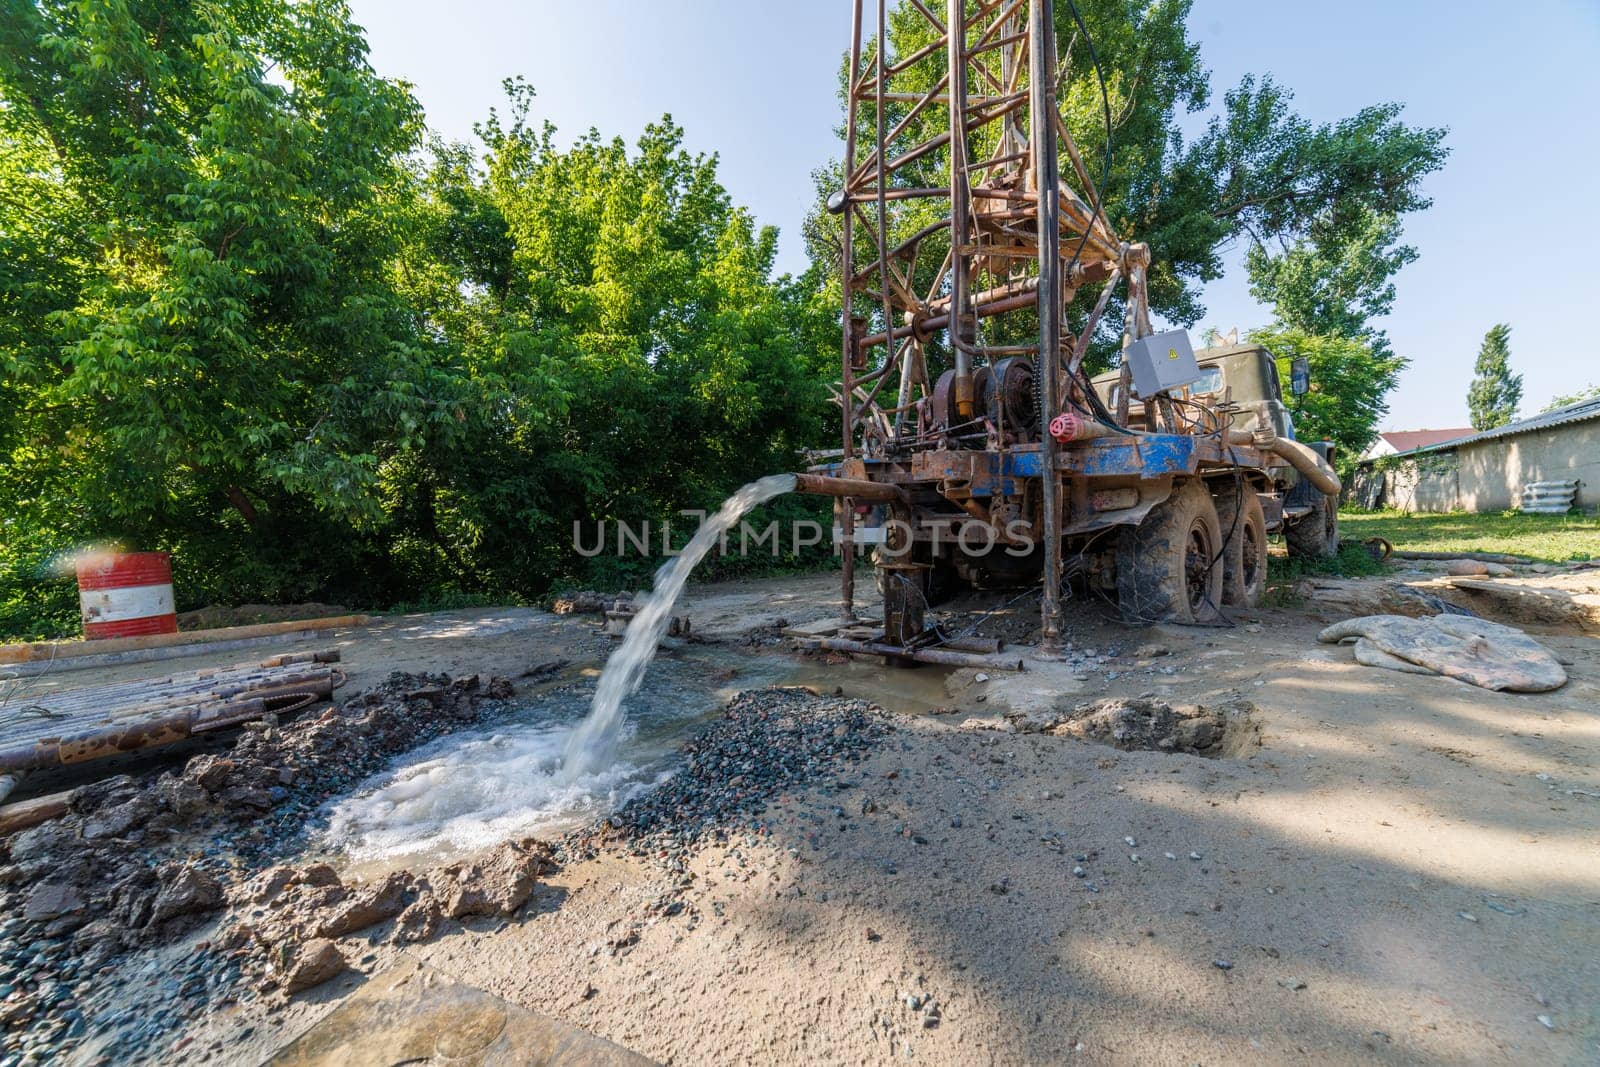 Old water pump truck extracts water from a hole in the ground at sunny summer day, surrounded by a natural landscape with trees, plants, and soil. Ultra-wide angle.